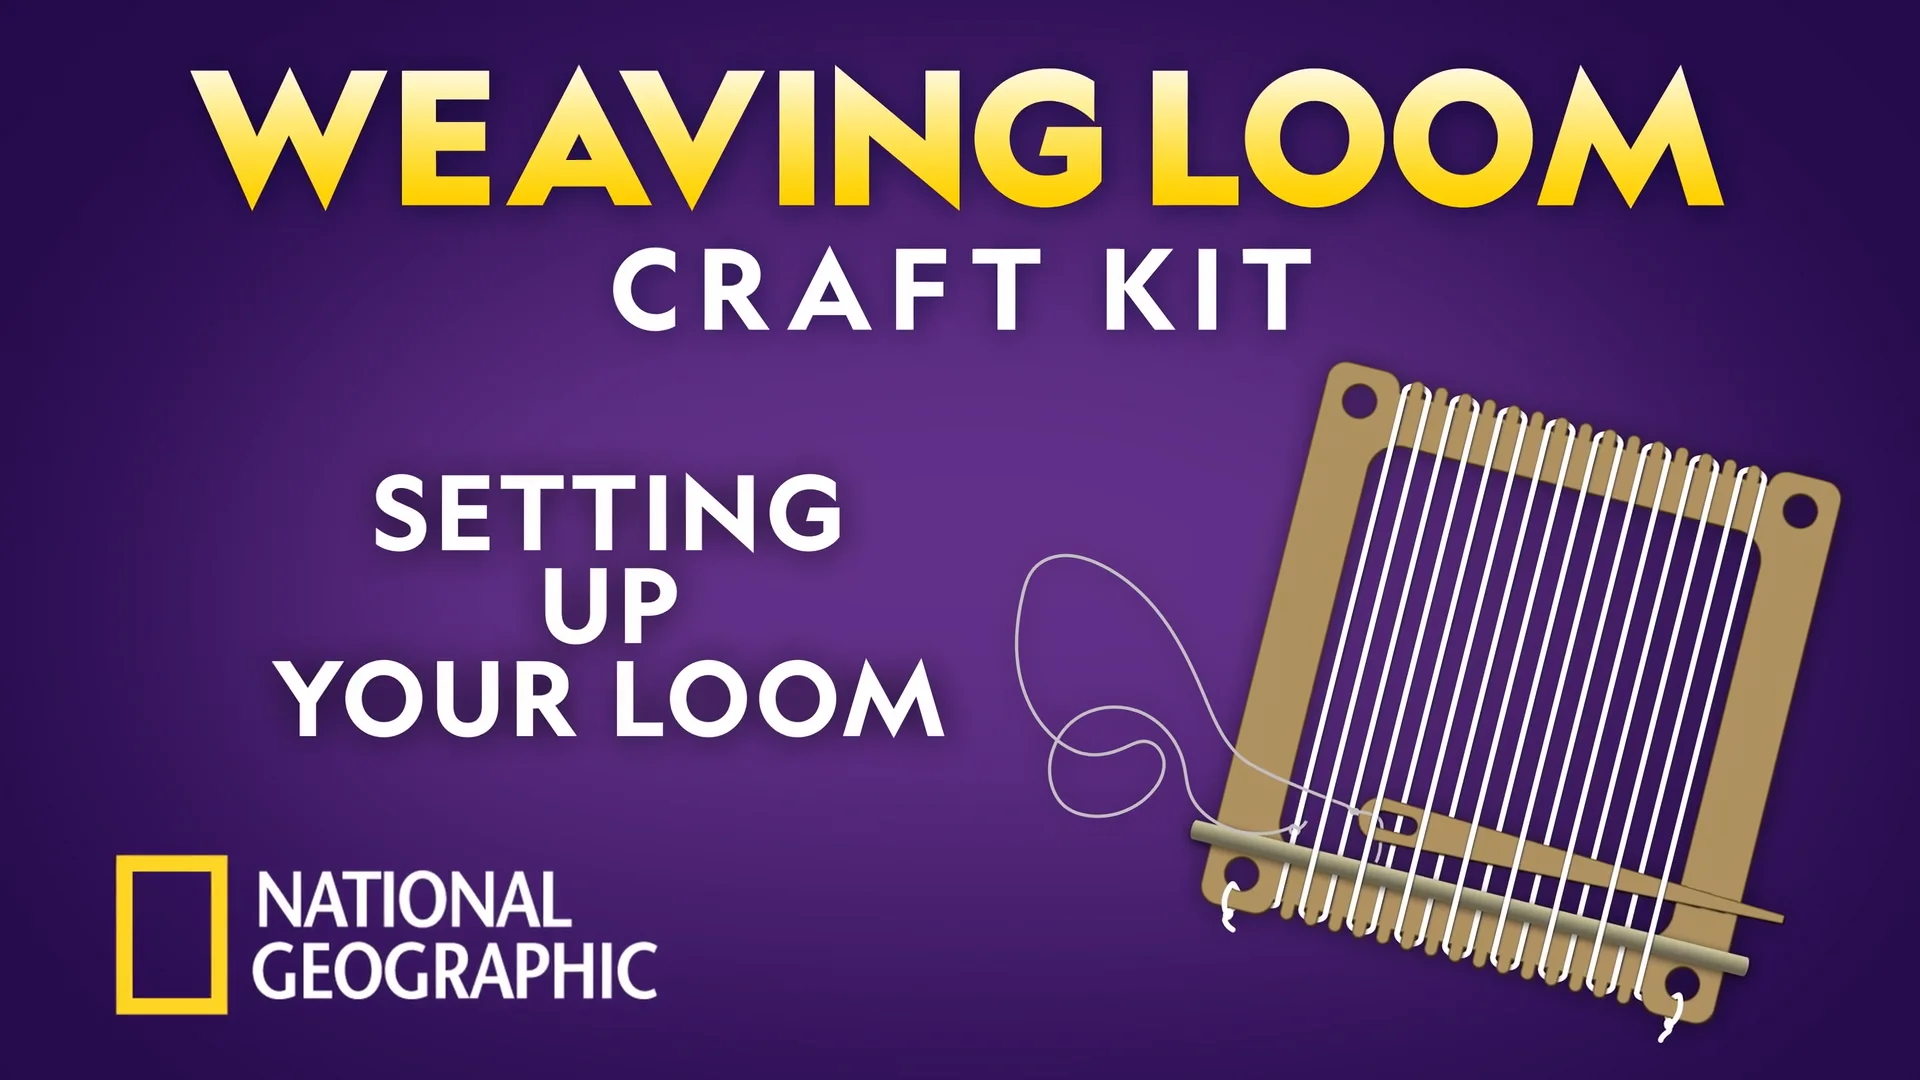 National Geographic Weaving Loom Craft Kit - Macy's